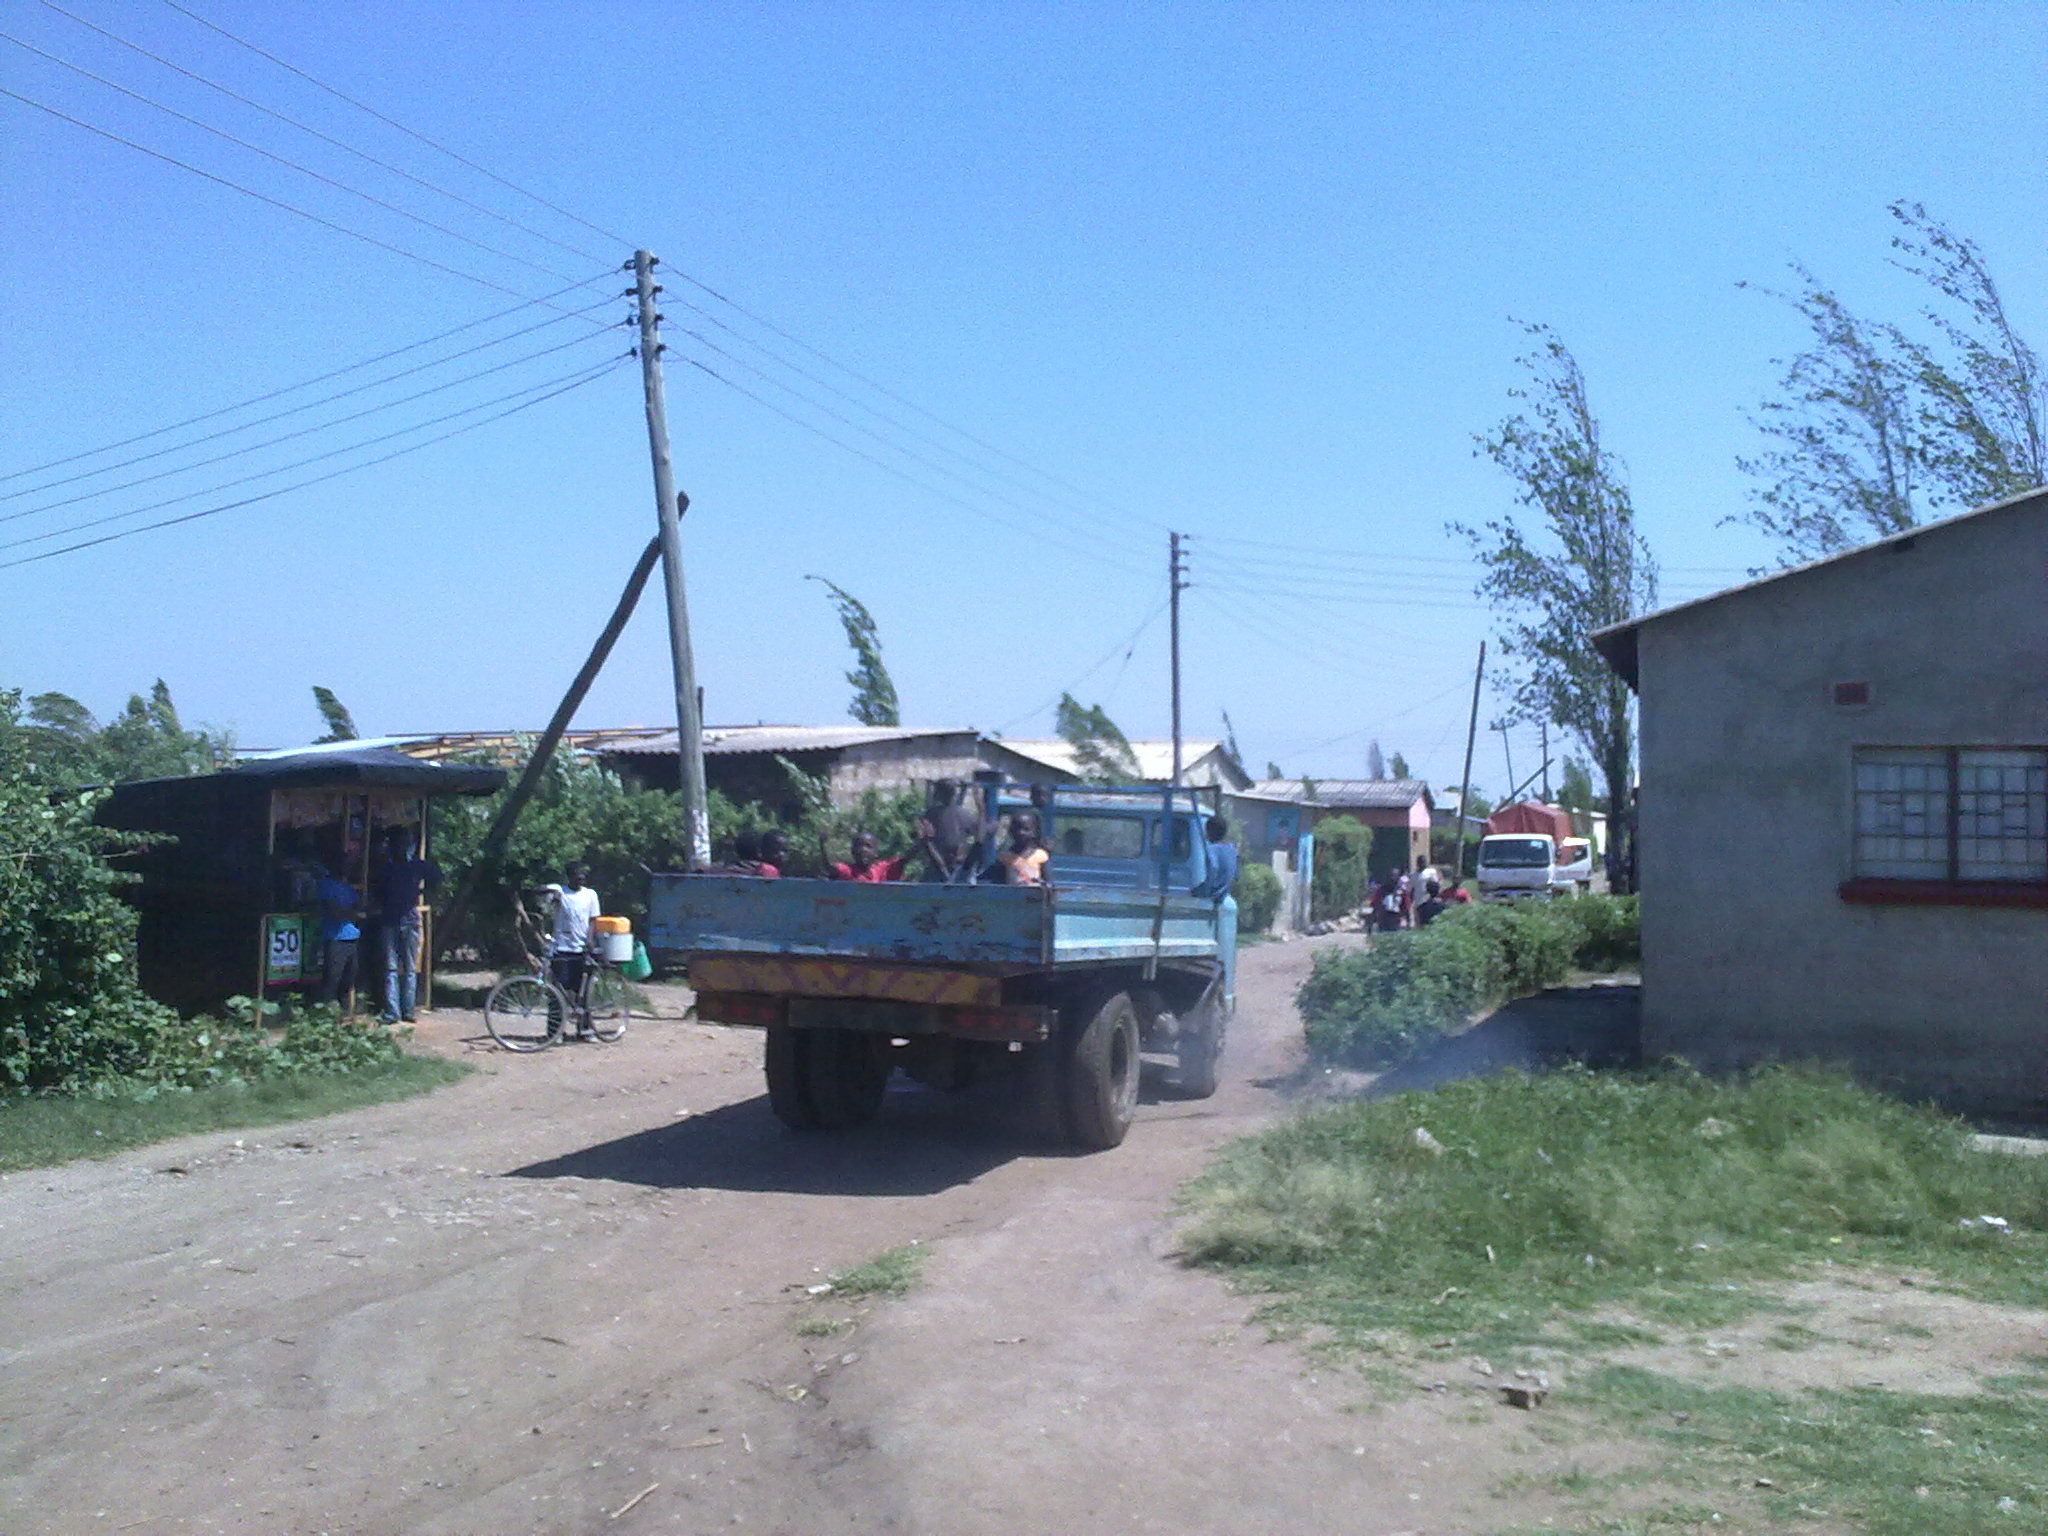 a truck carrying people driving down a rural road